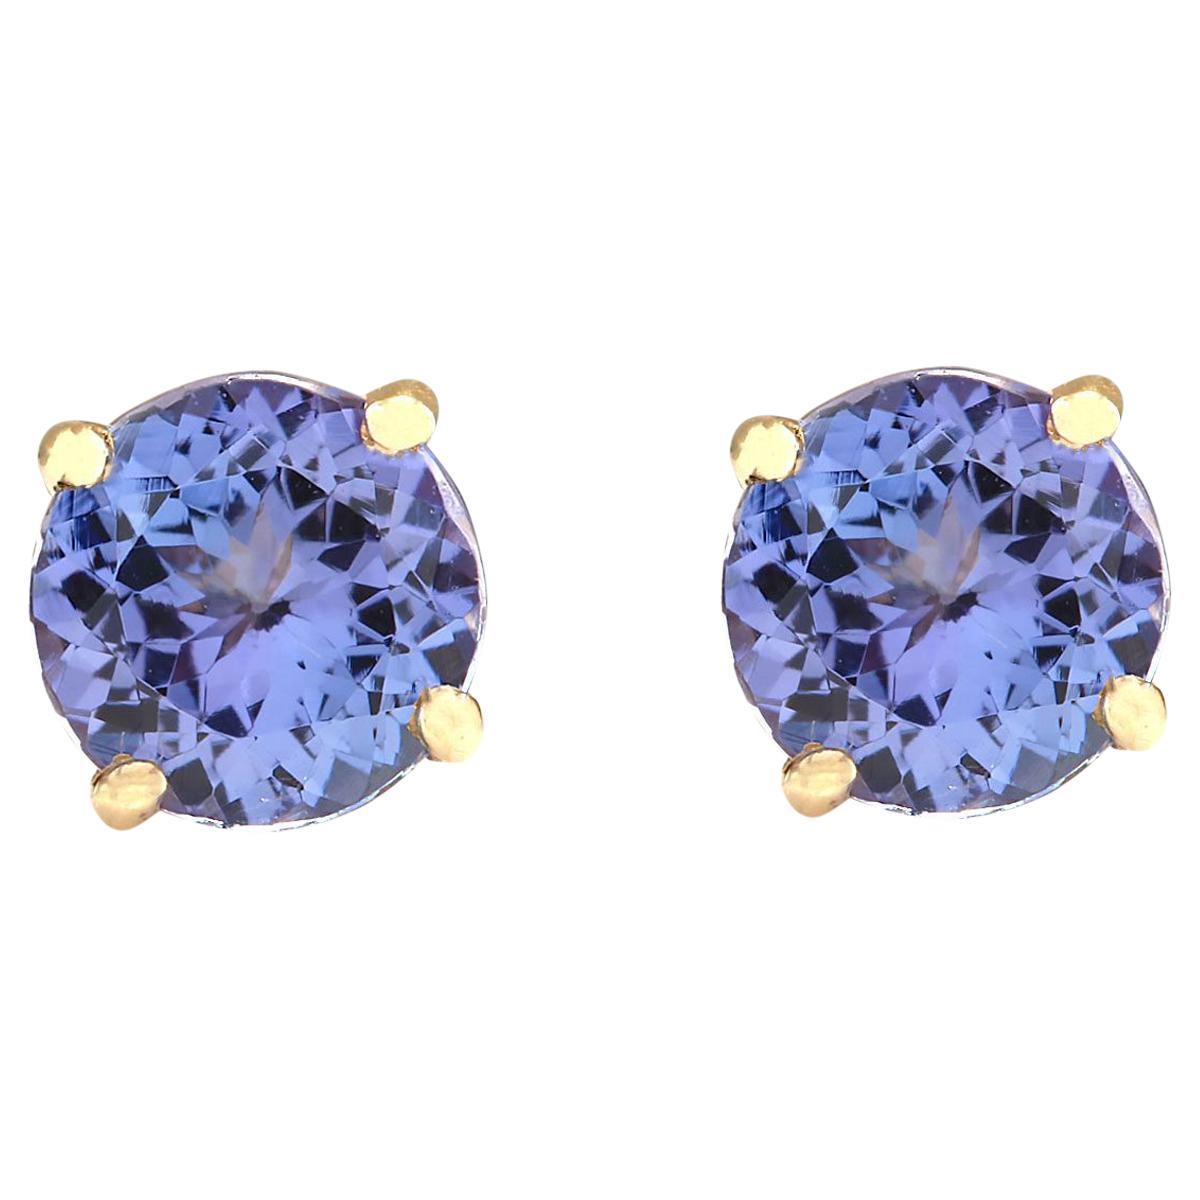 Round Cut Exquisite Natural Tanzanite Earrings In 14 Karat Yellow Gold  For Sale